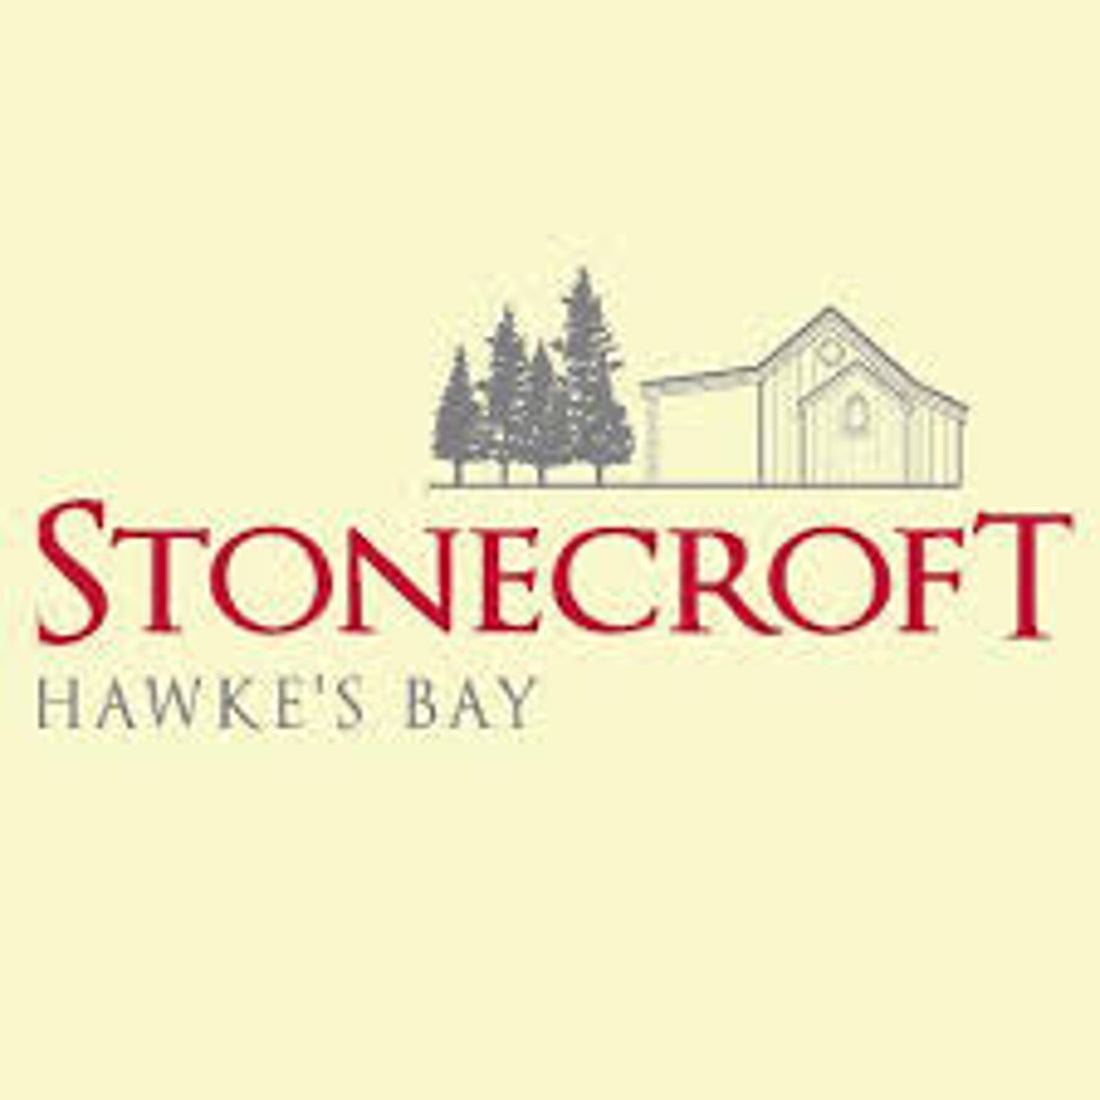 STONECROFT TAKES OUT THE BIG POINTS  IN GOURMET TRAVELLER WINE APRIL / MAY 2015 EDITION